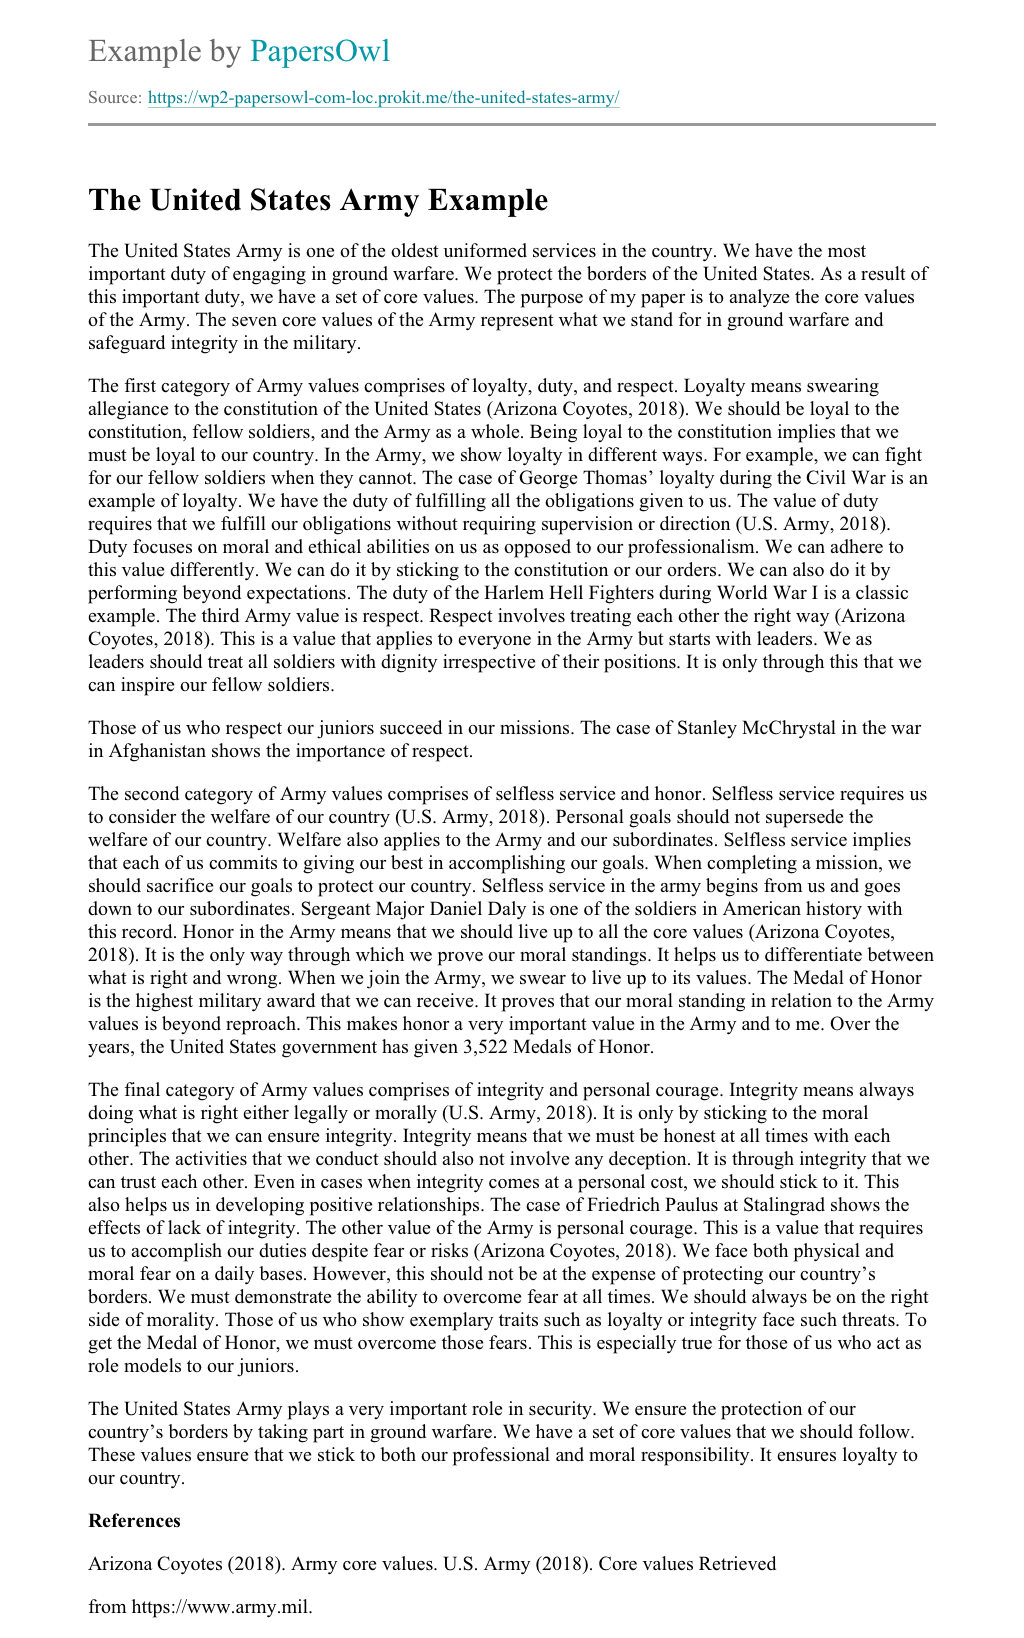 Argumentative Synthesis To the Exact https://essaywriter24.com/dissertation-writing/ same Intercourse Marriage Article Analogy